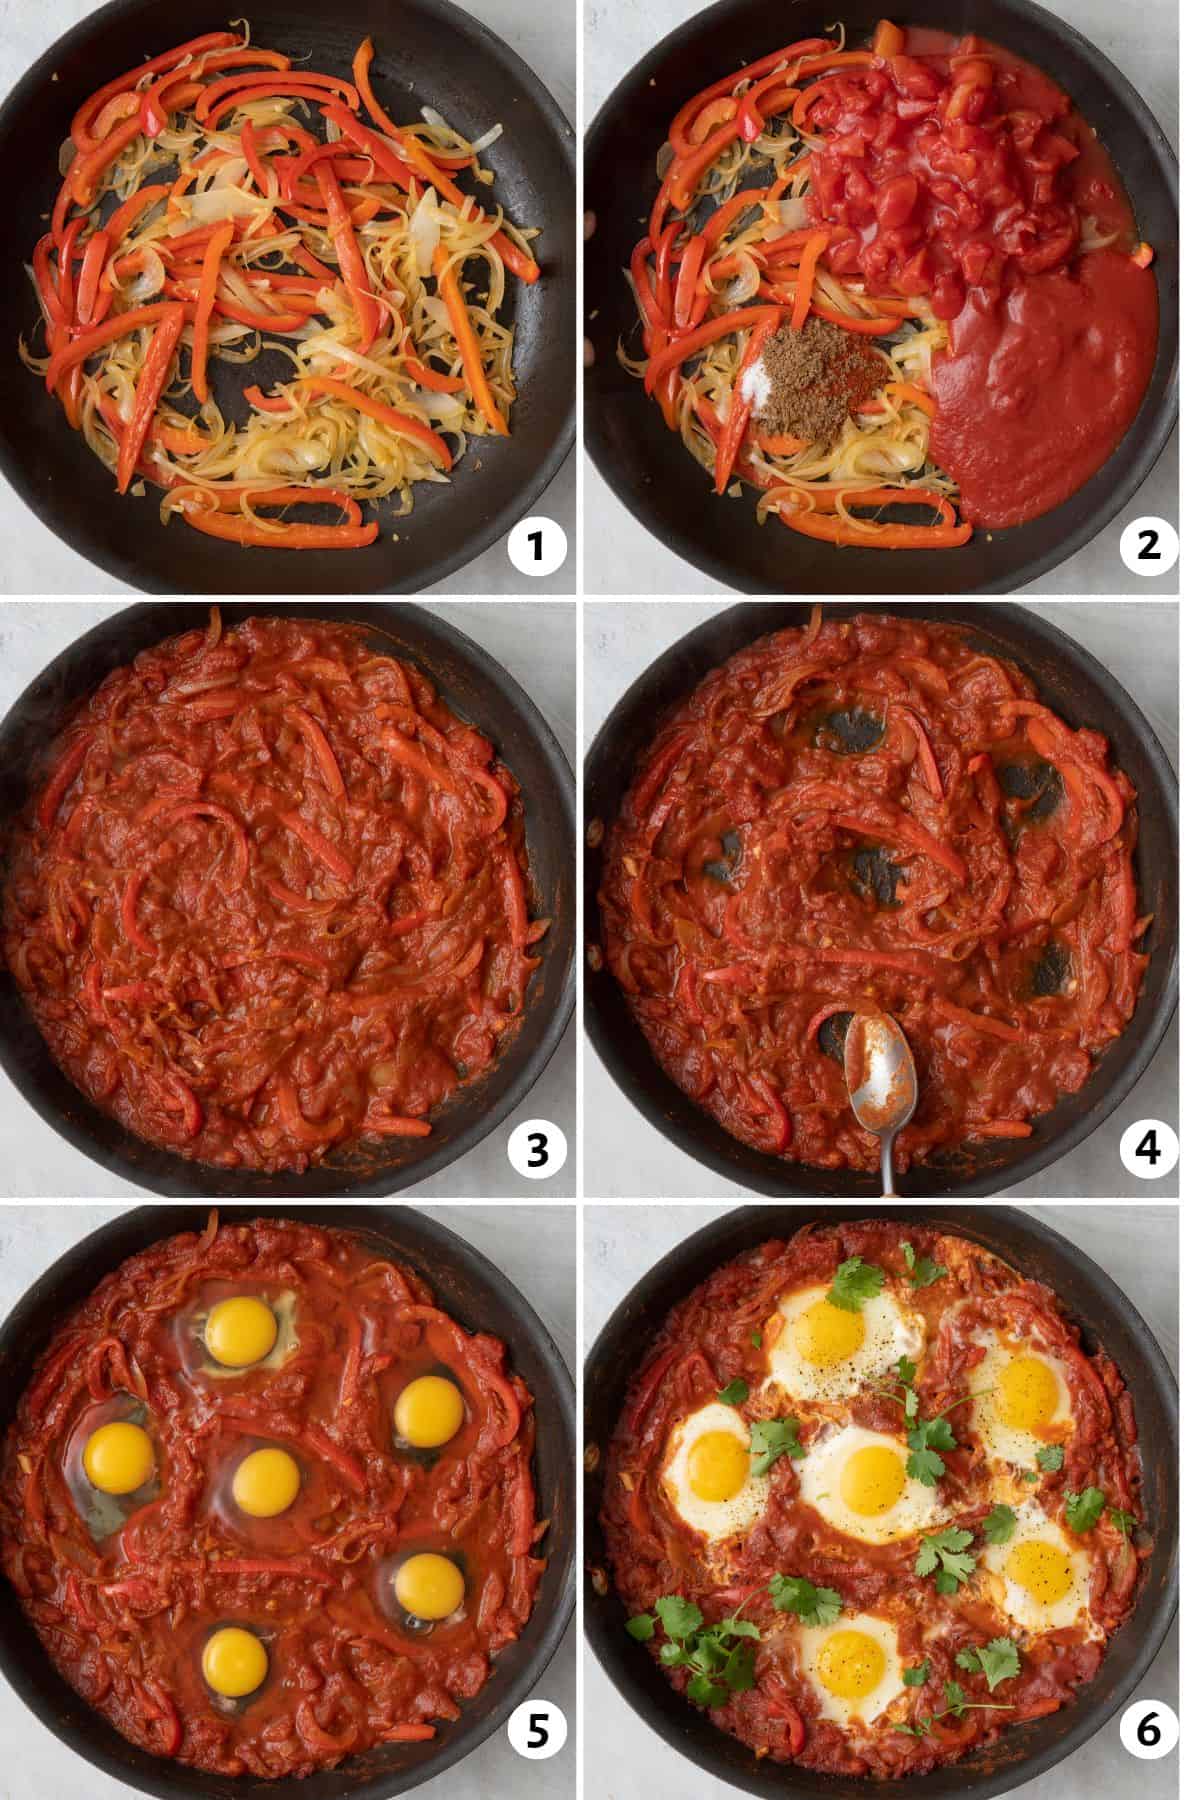 6 image collage making recipe in skillet: 1- onion, peppers, and garlic cooke din skillet, 2- tomatoes and sauce with seasonings added before combined, 3- mixture after cooked and thickened, 4- spoon pressing indentions into stew, 5- eggs cracked into nests before cooked, 6- eggs after cooked in stew garnished with fresh cilantro.